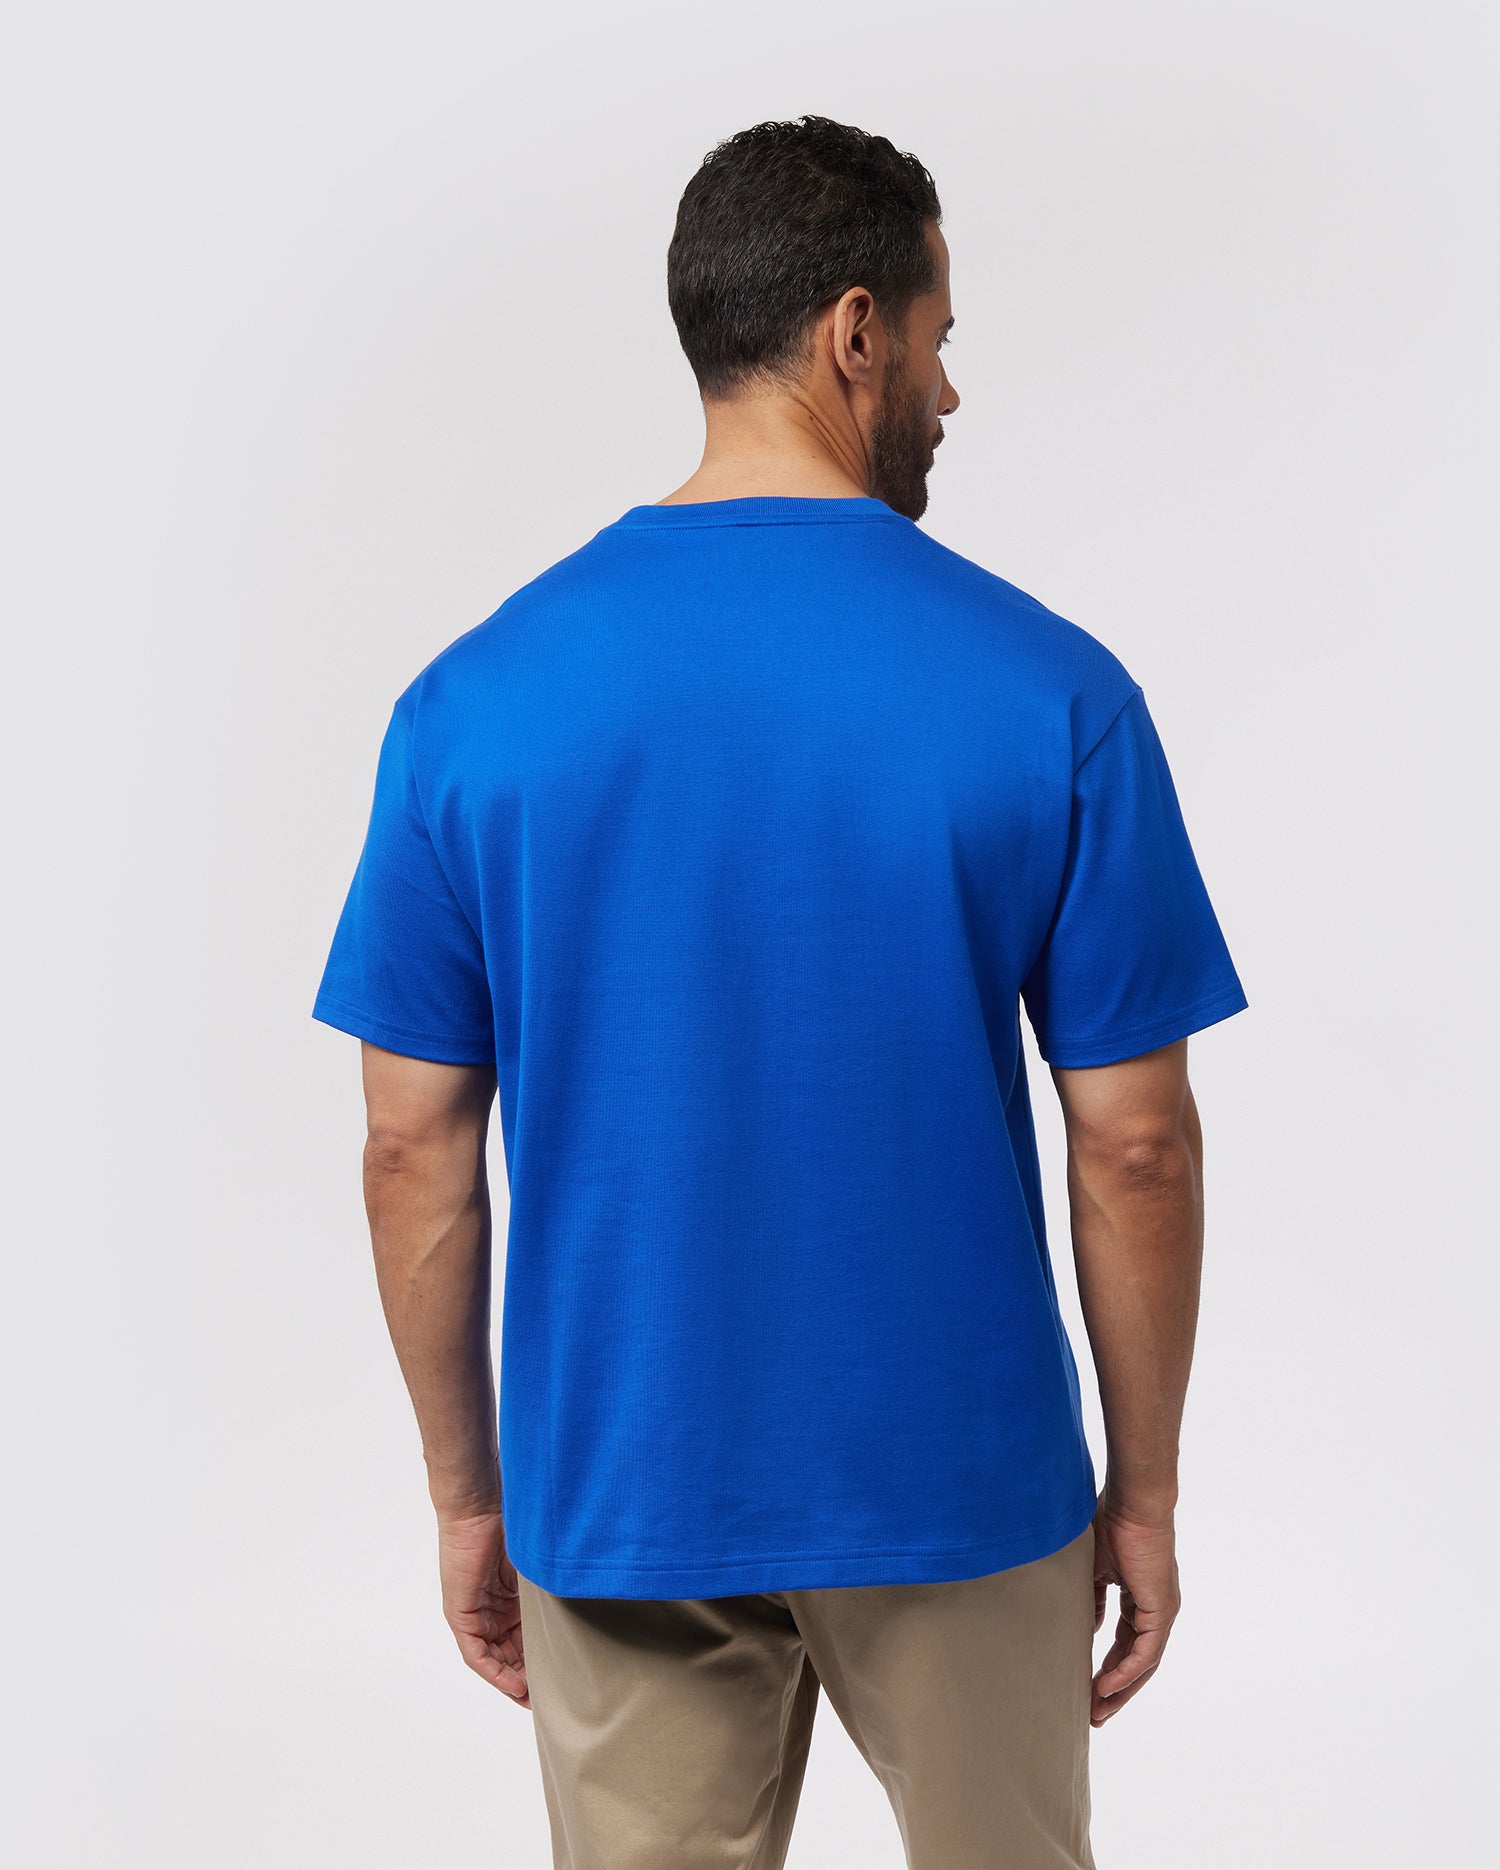 MENS BLUE RELAXED FIT TEE | PSYCHO BUNNY – Psycho Bunny